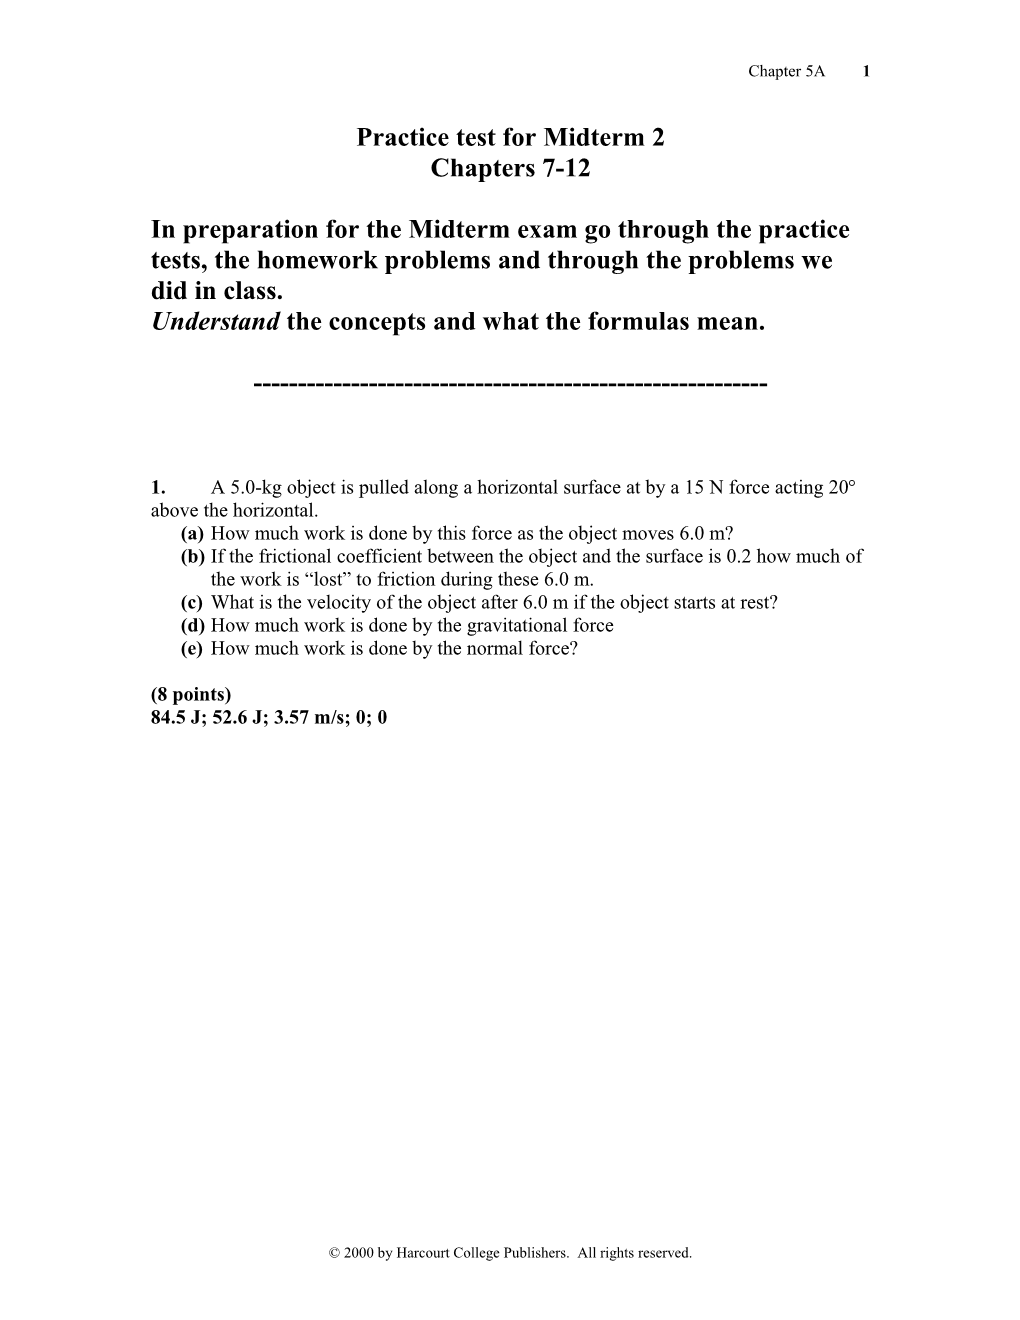 Chapter 5A Practice Test Midterm 2 1 Chapter 7 12 Long Answer